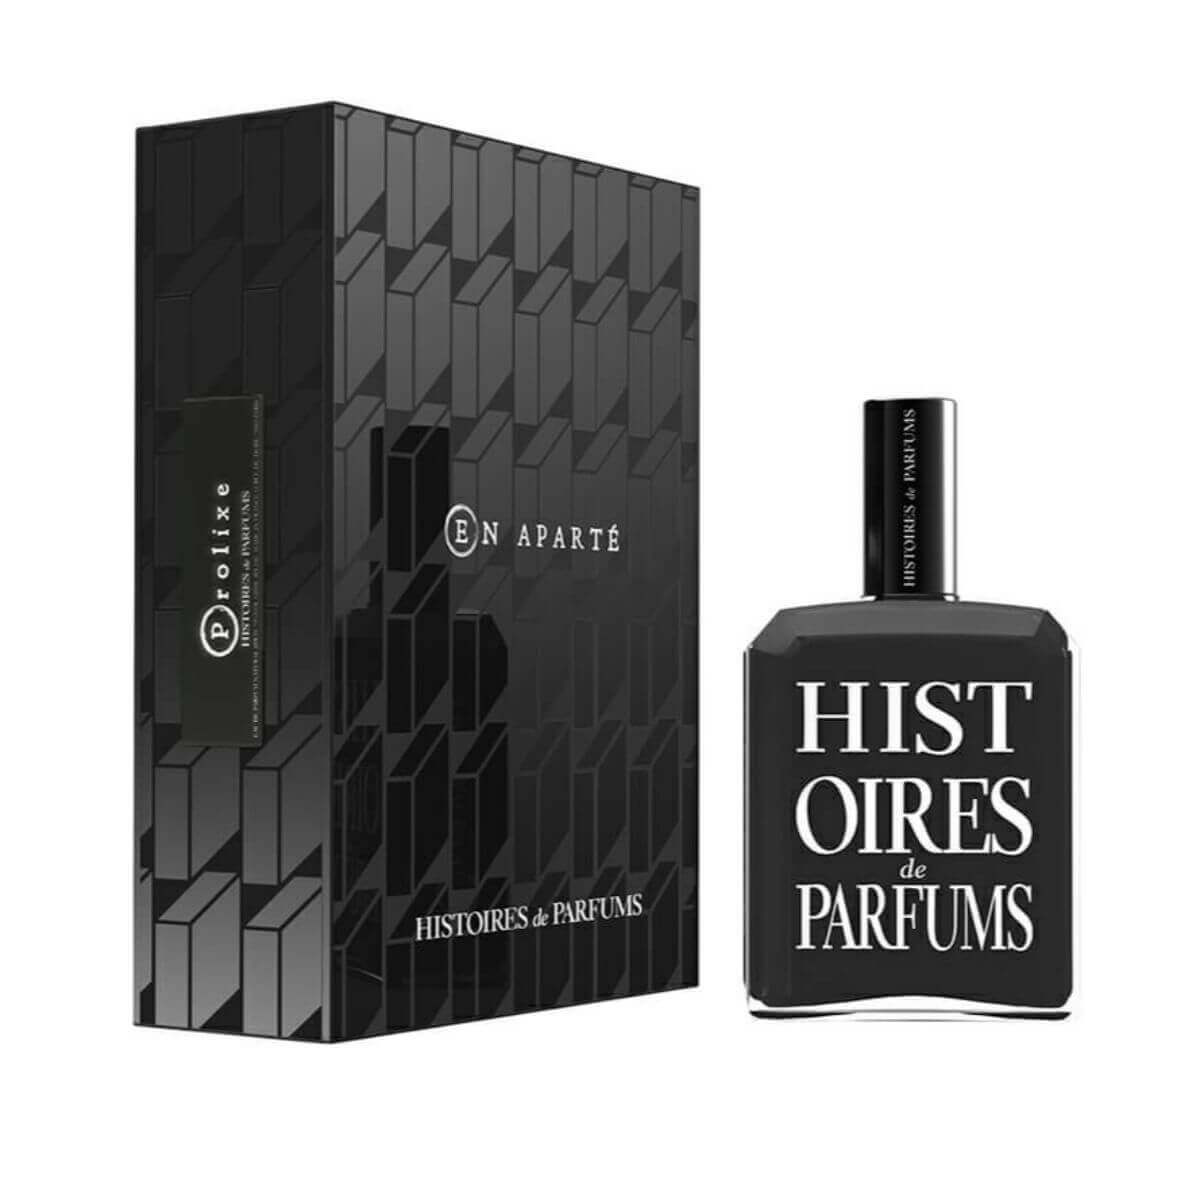 Histoires De Parfum – Prolixe, Widely Diffused Fragrance For Both Women And Menthe Oud Intensity Along With The Patchouli’S Mysterious Power Spread Abundantlya Profusion That Everyone Is Smitten ByTop Notes: Cardamom, GingerHeart Notes: Rose, OlibanumBase Notes: Oud, Patchouli, Tobacco .